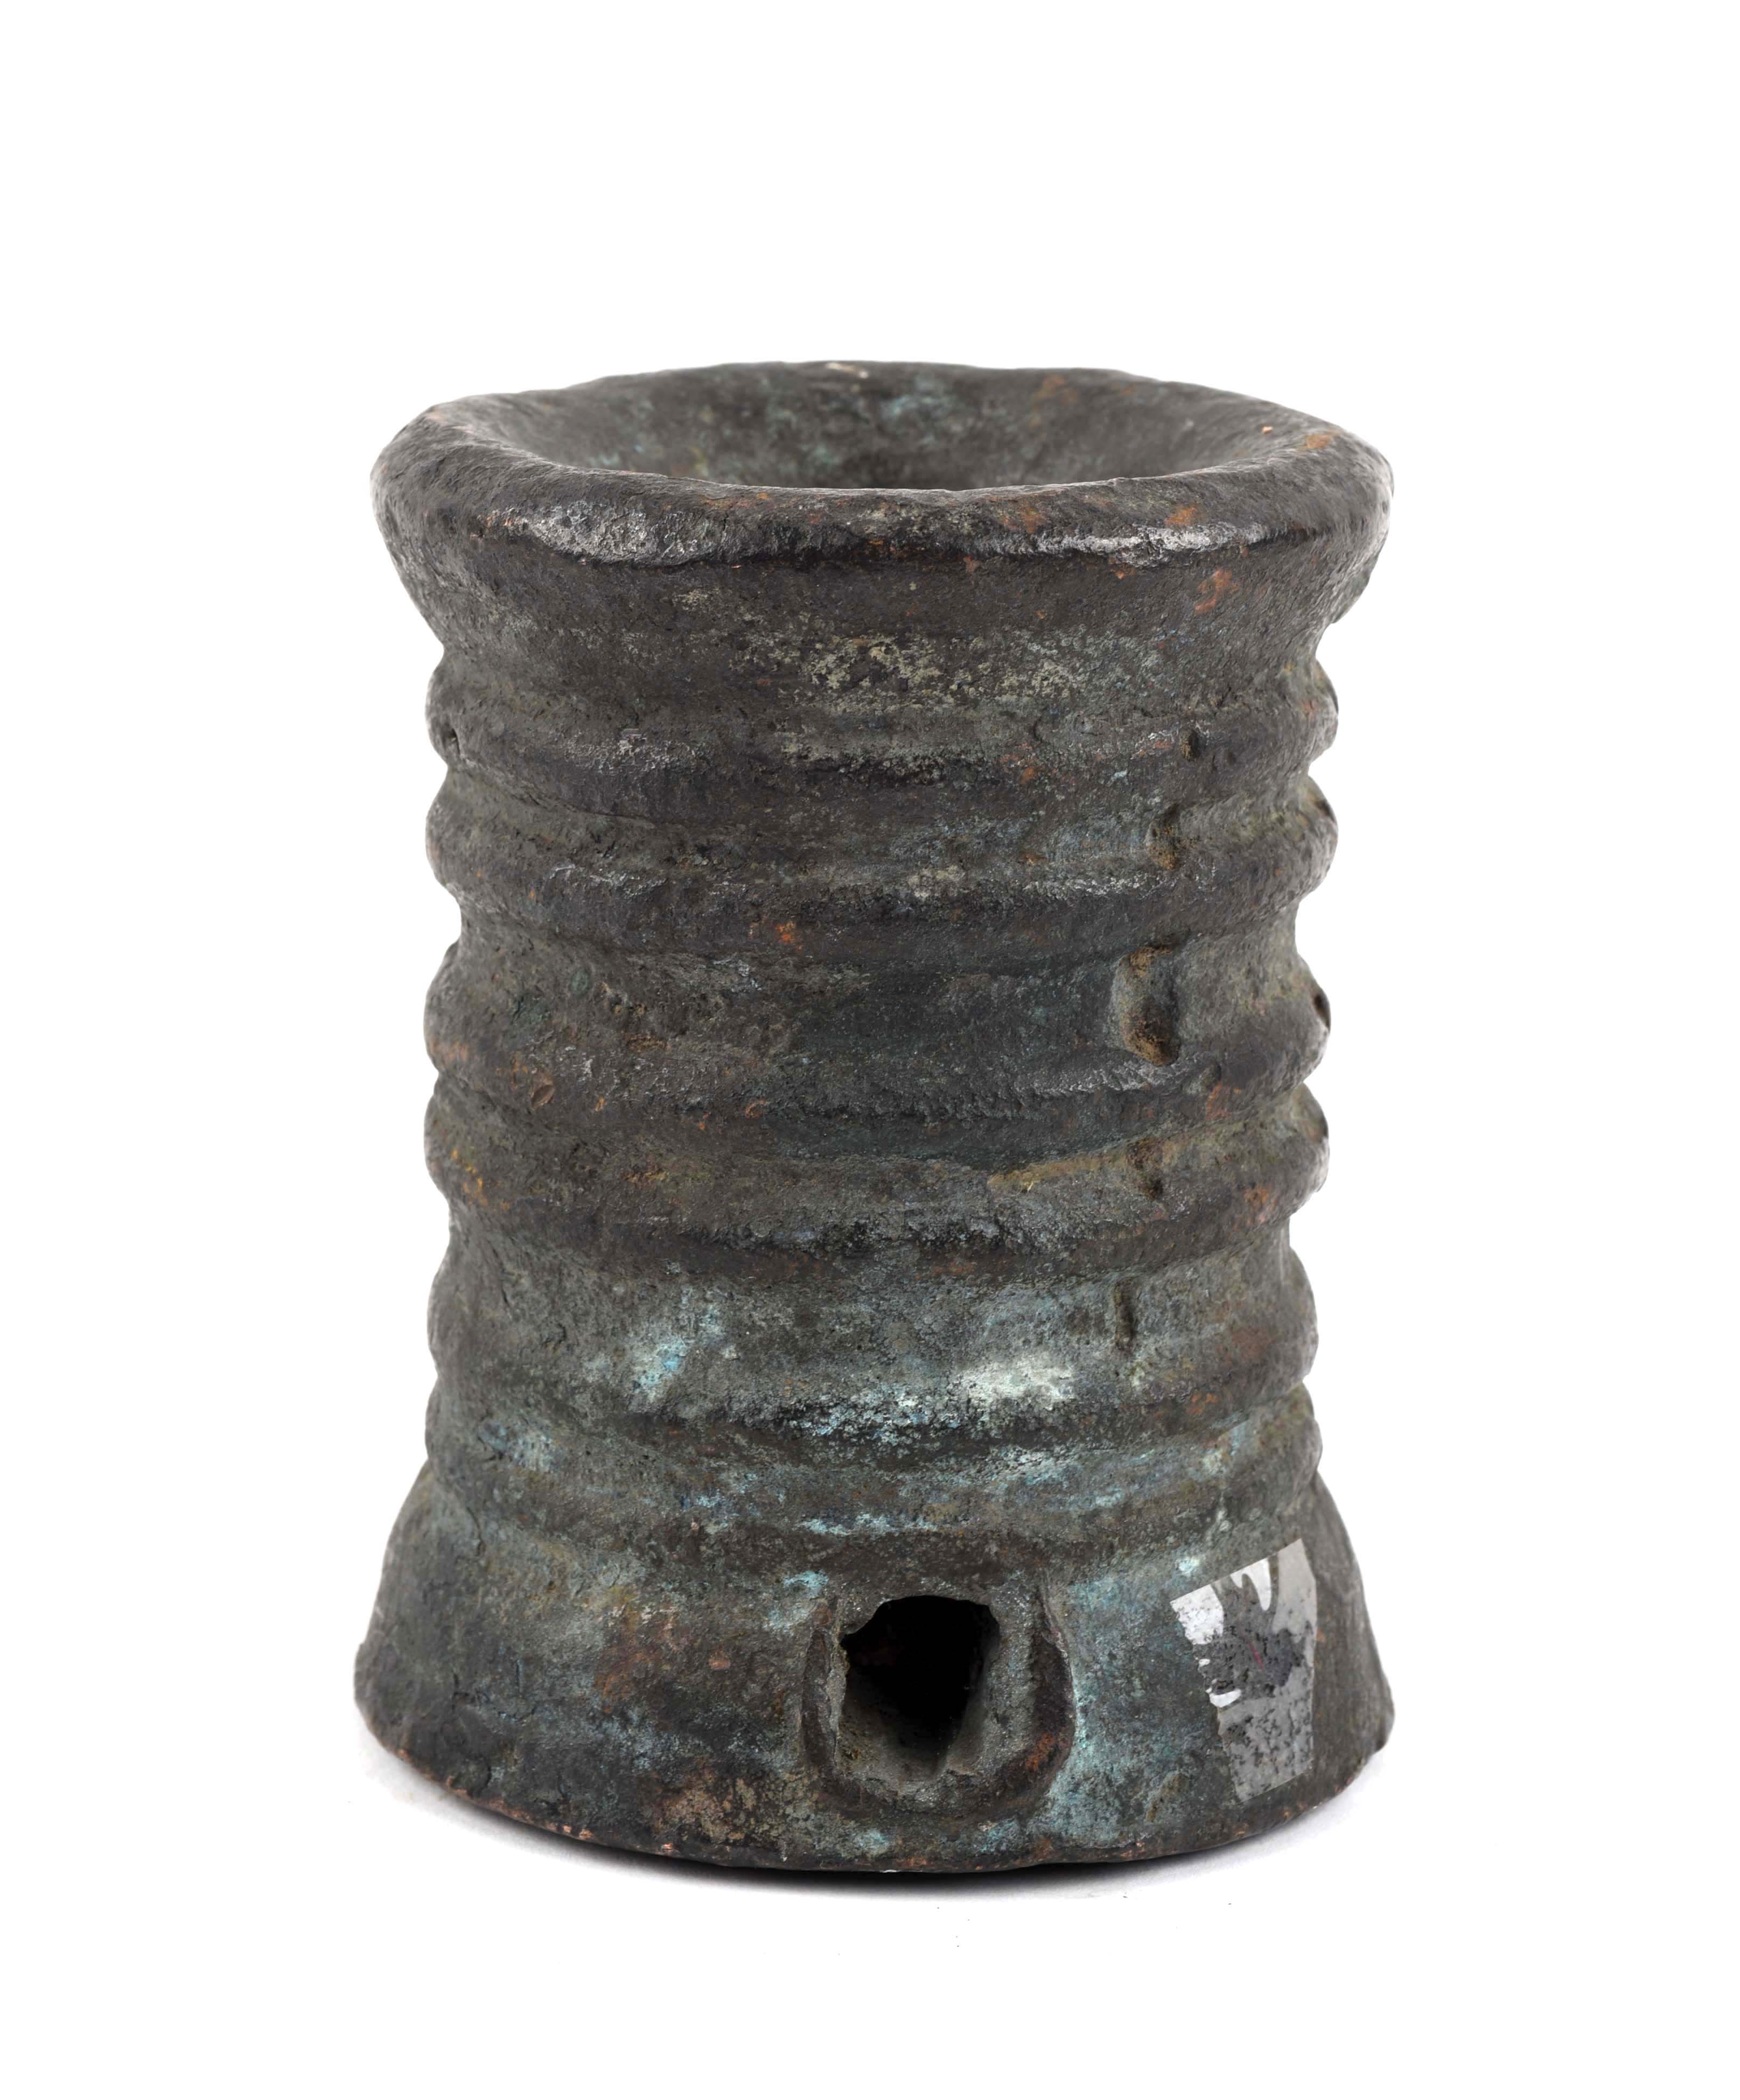 17th Century Spanish Colonial Bronze Salute Cannon or Signal Mortar.